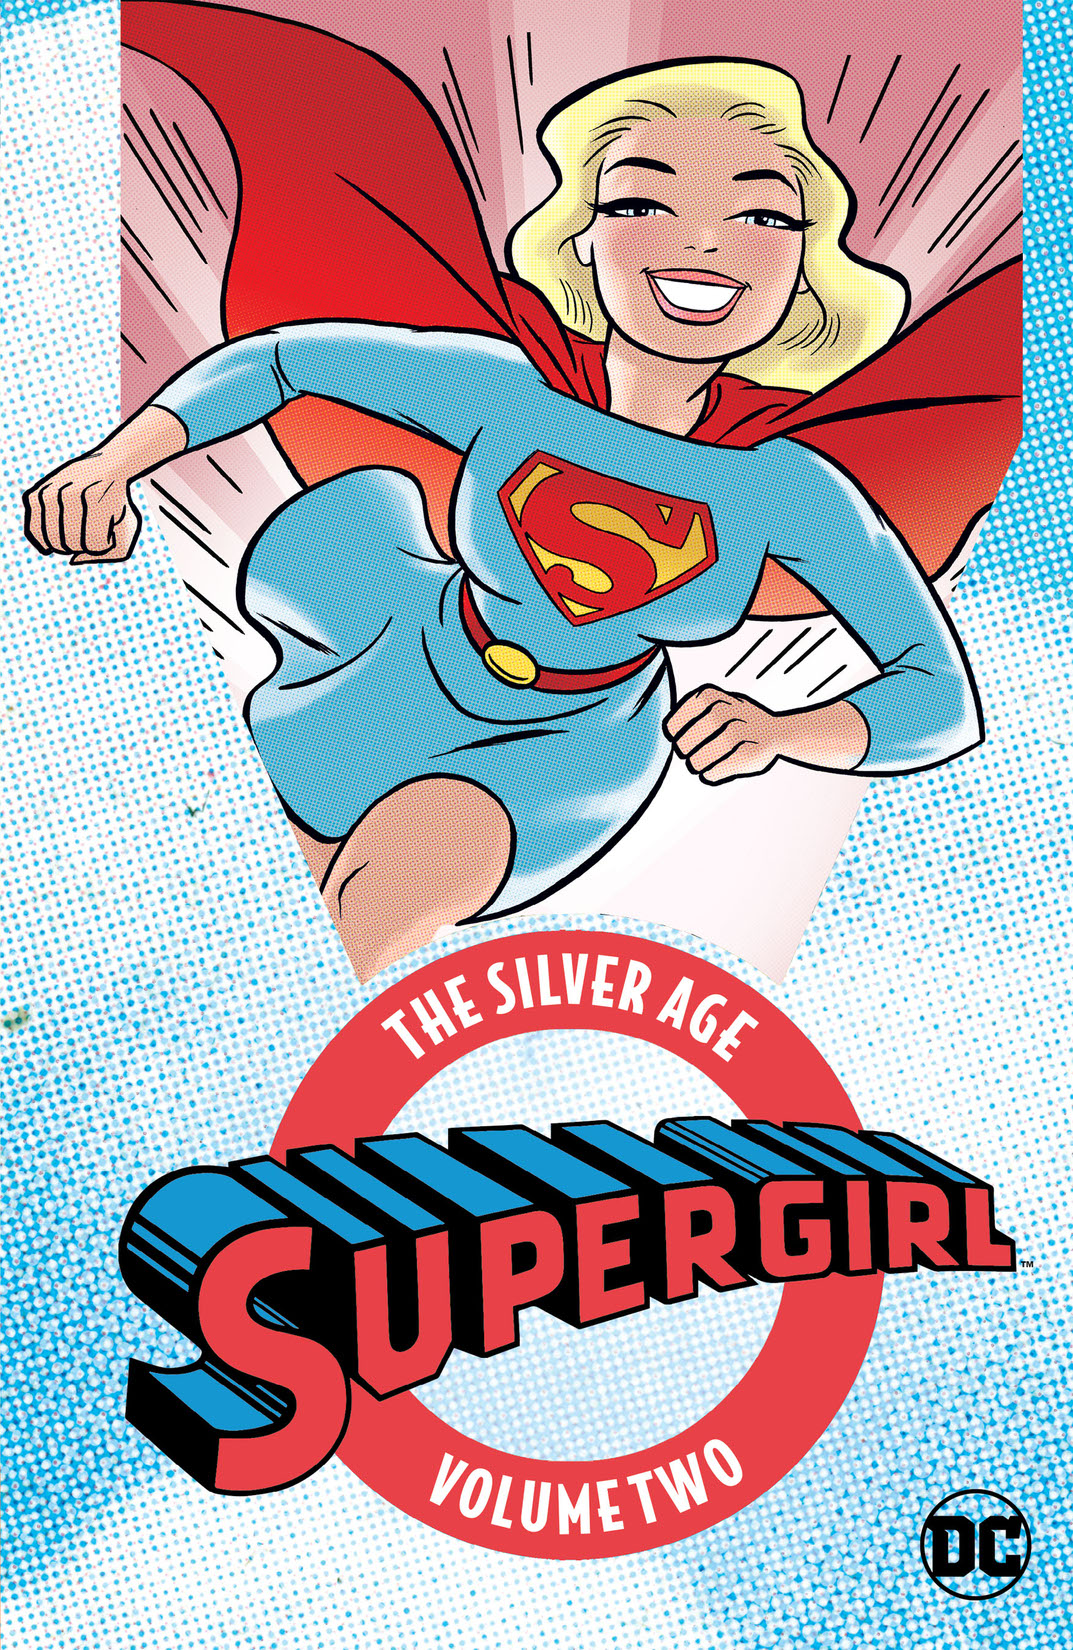 Supergirl: The Silver Age Vol. 2 preview images